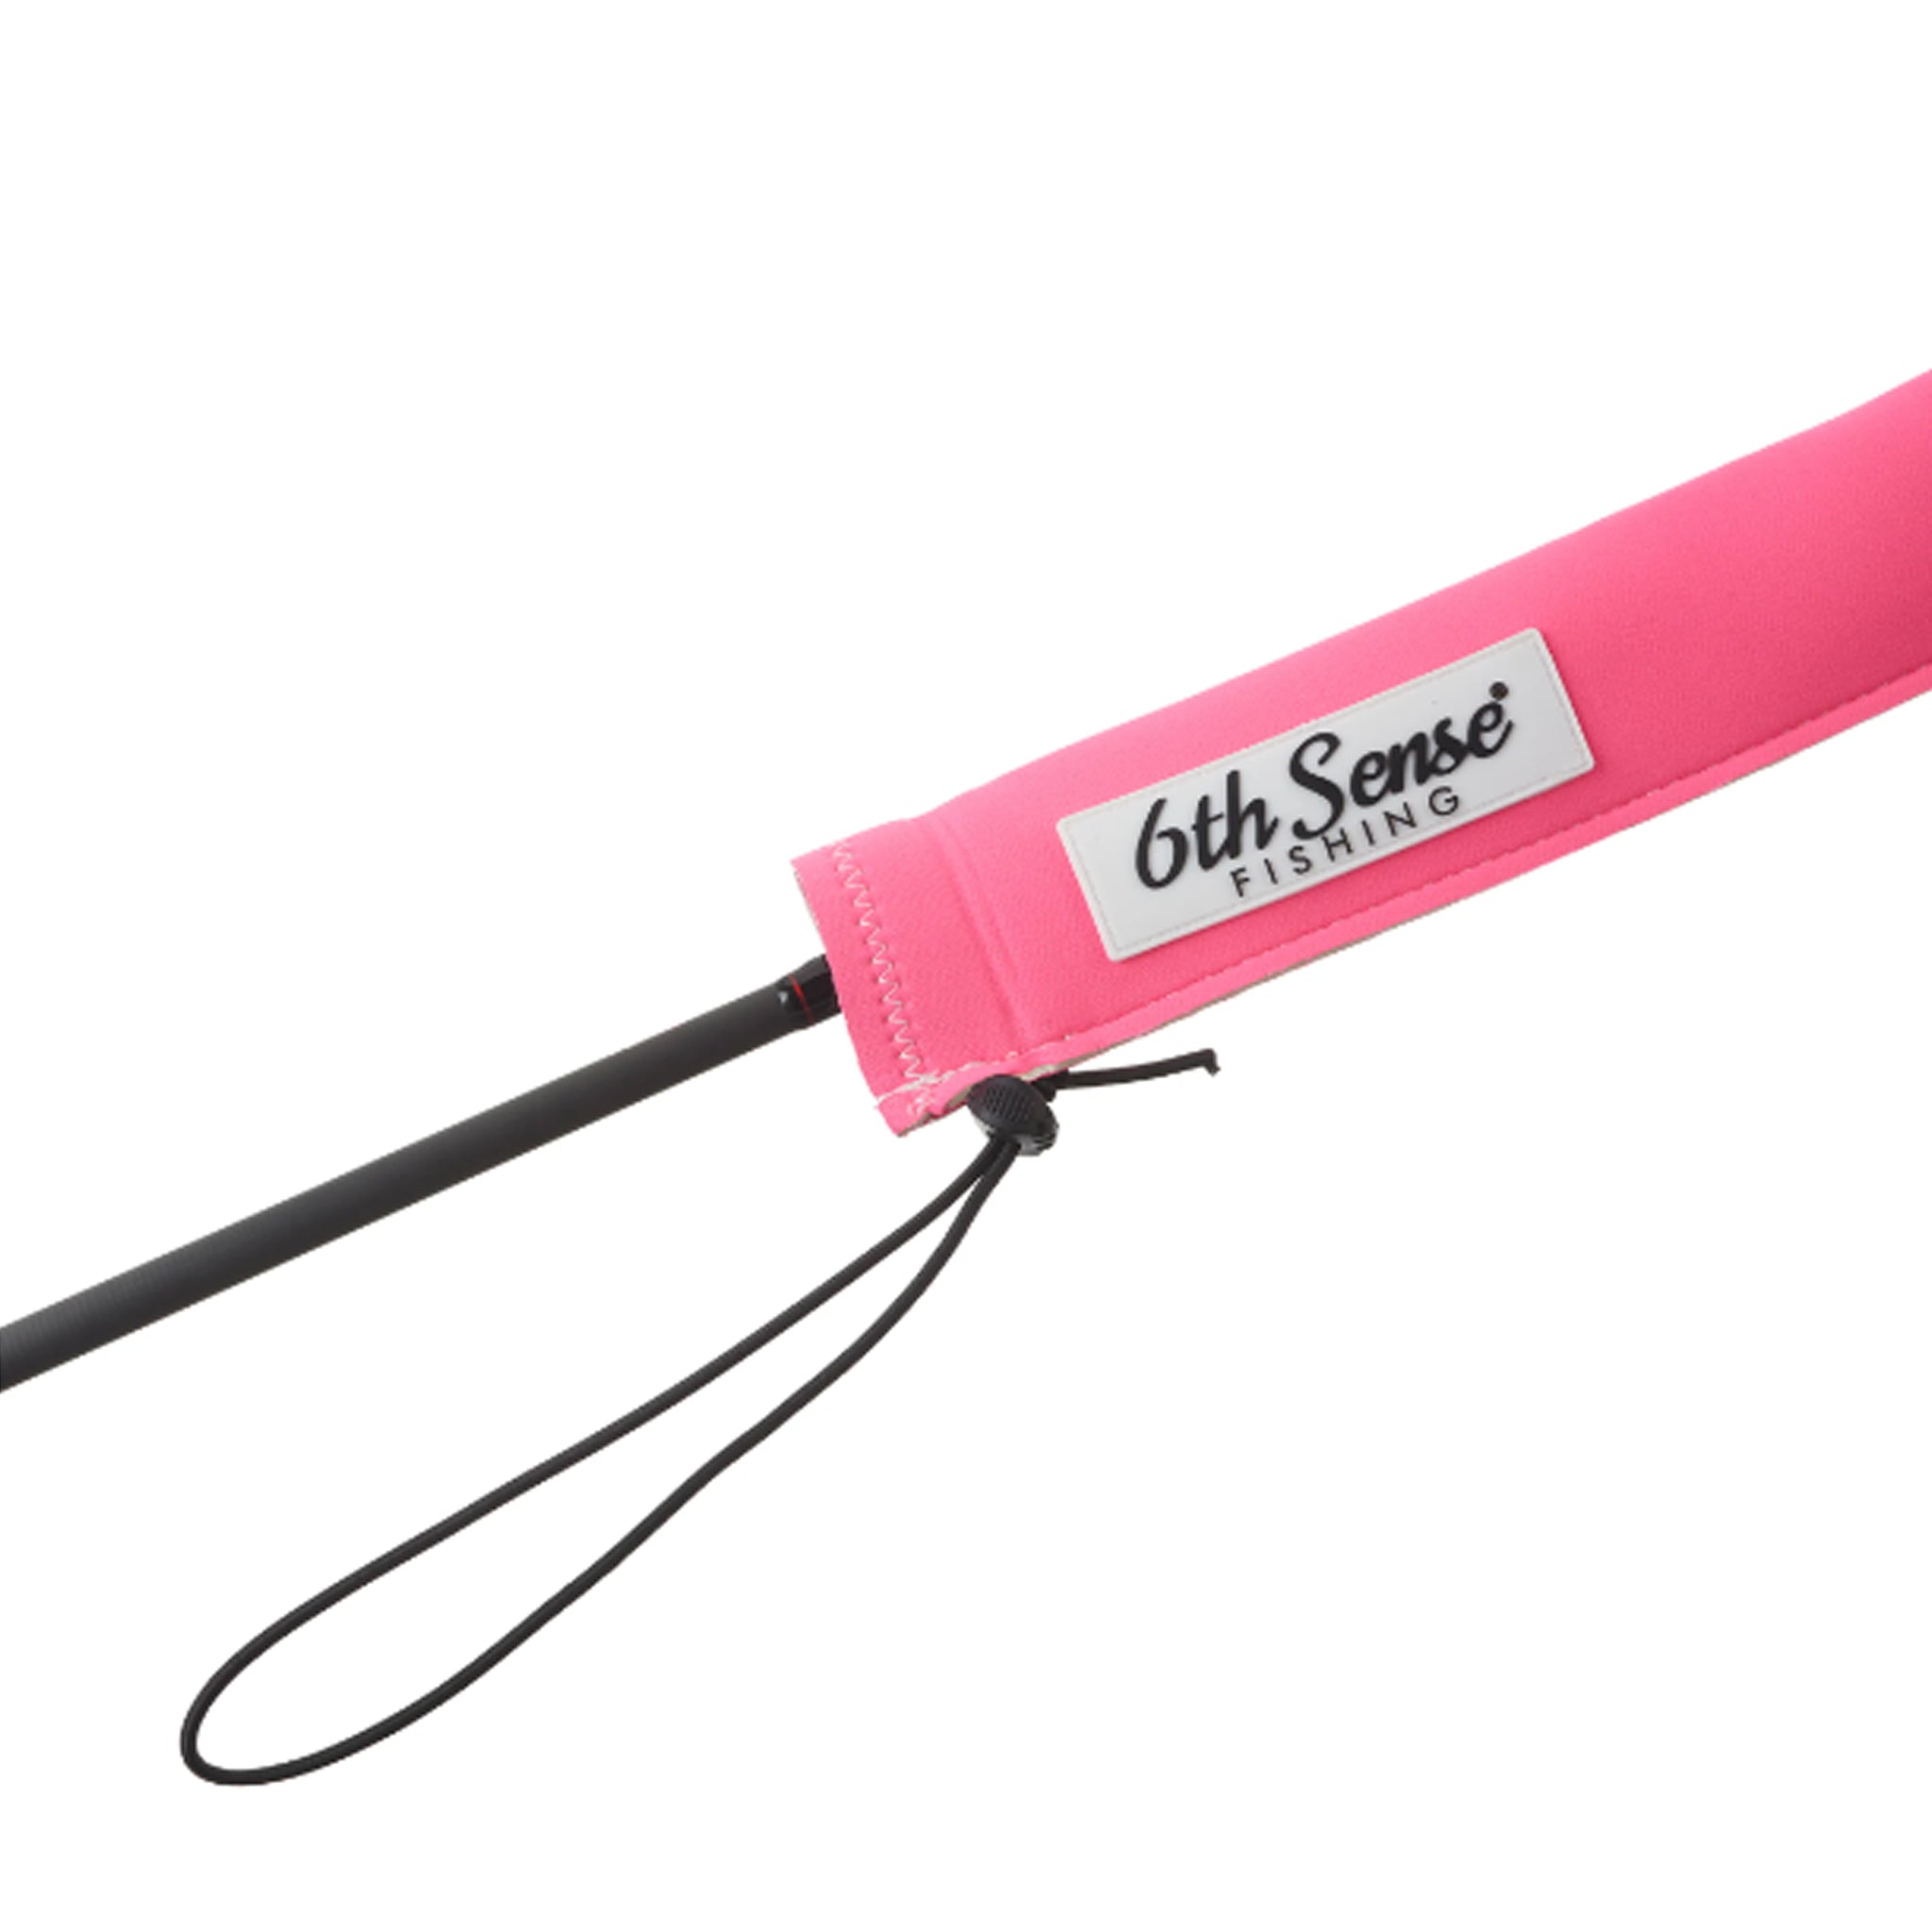 Free shipping on qualified orders.Buy 6th Sense Fishing Rod Sleeve - Pink  at 6th Sense Fishing Sales Store